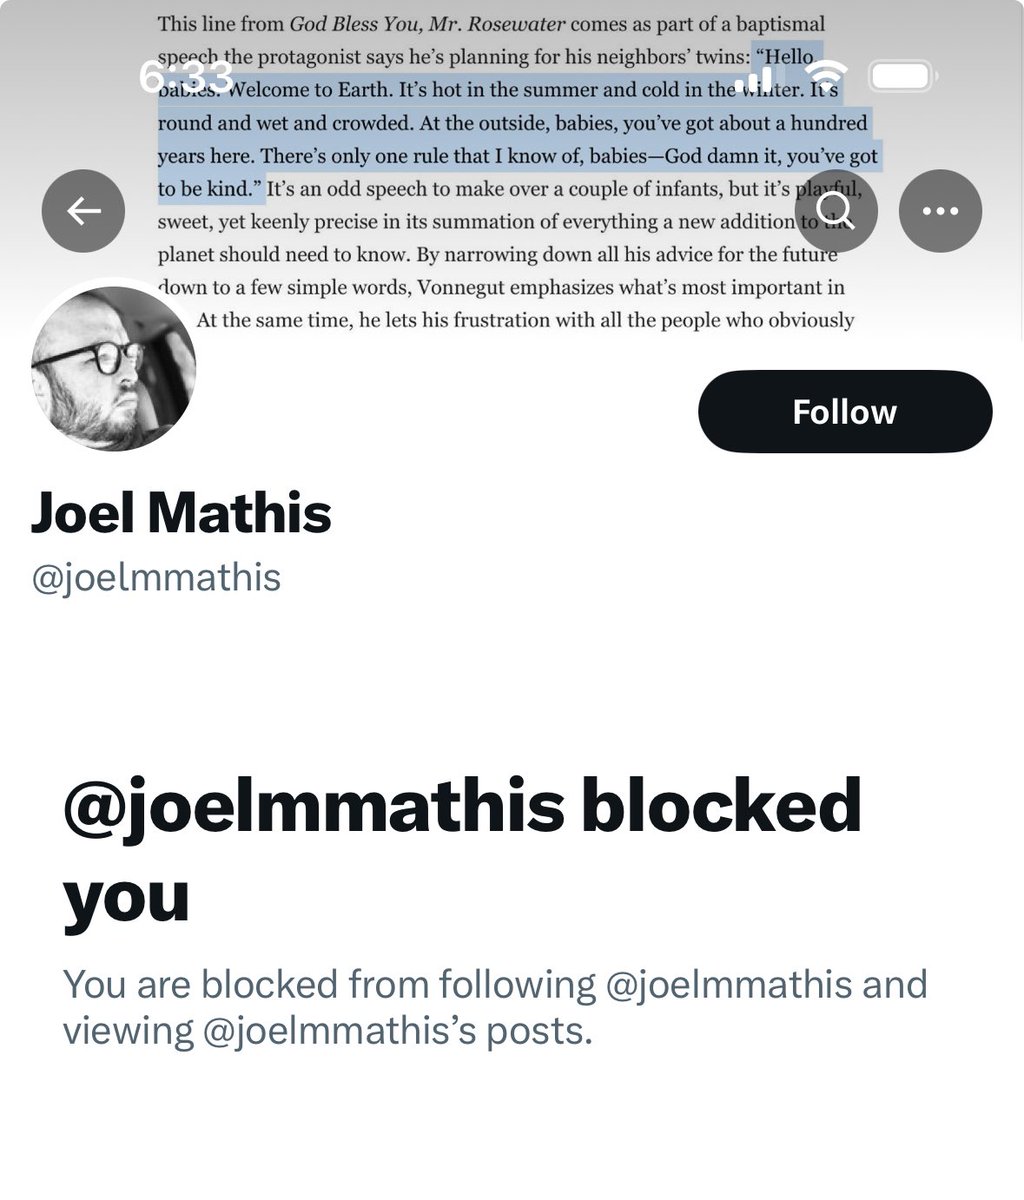 Another badge of honor. Another leftist opinion writer who can’t stand that someone challenges his views.